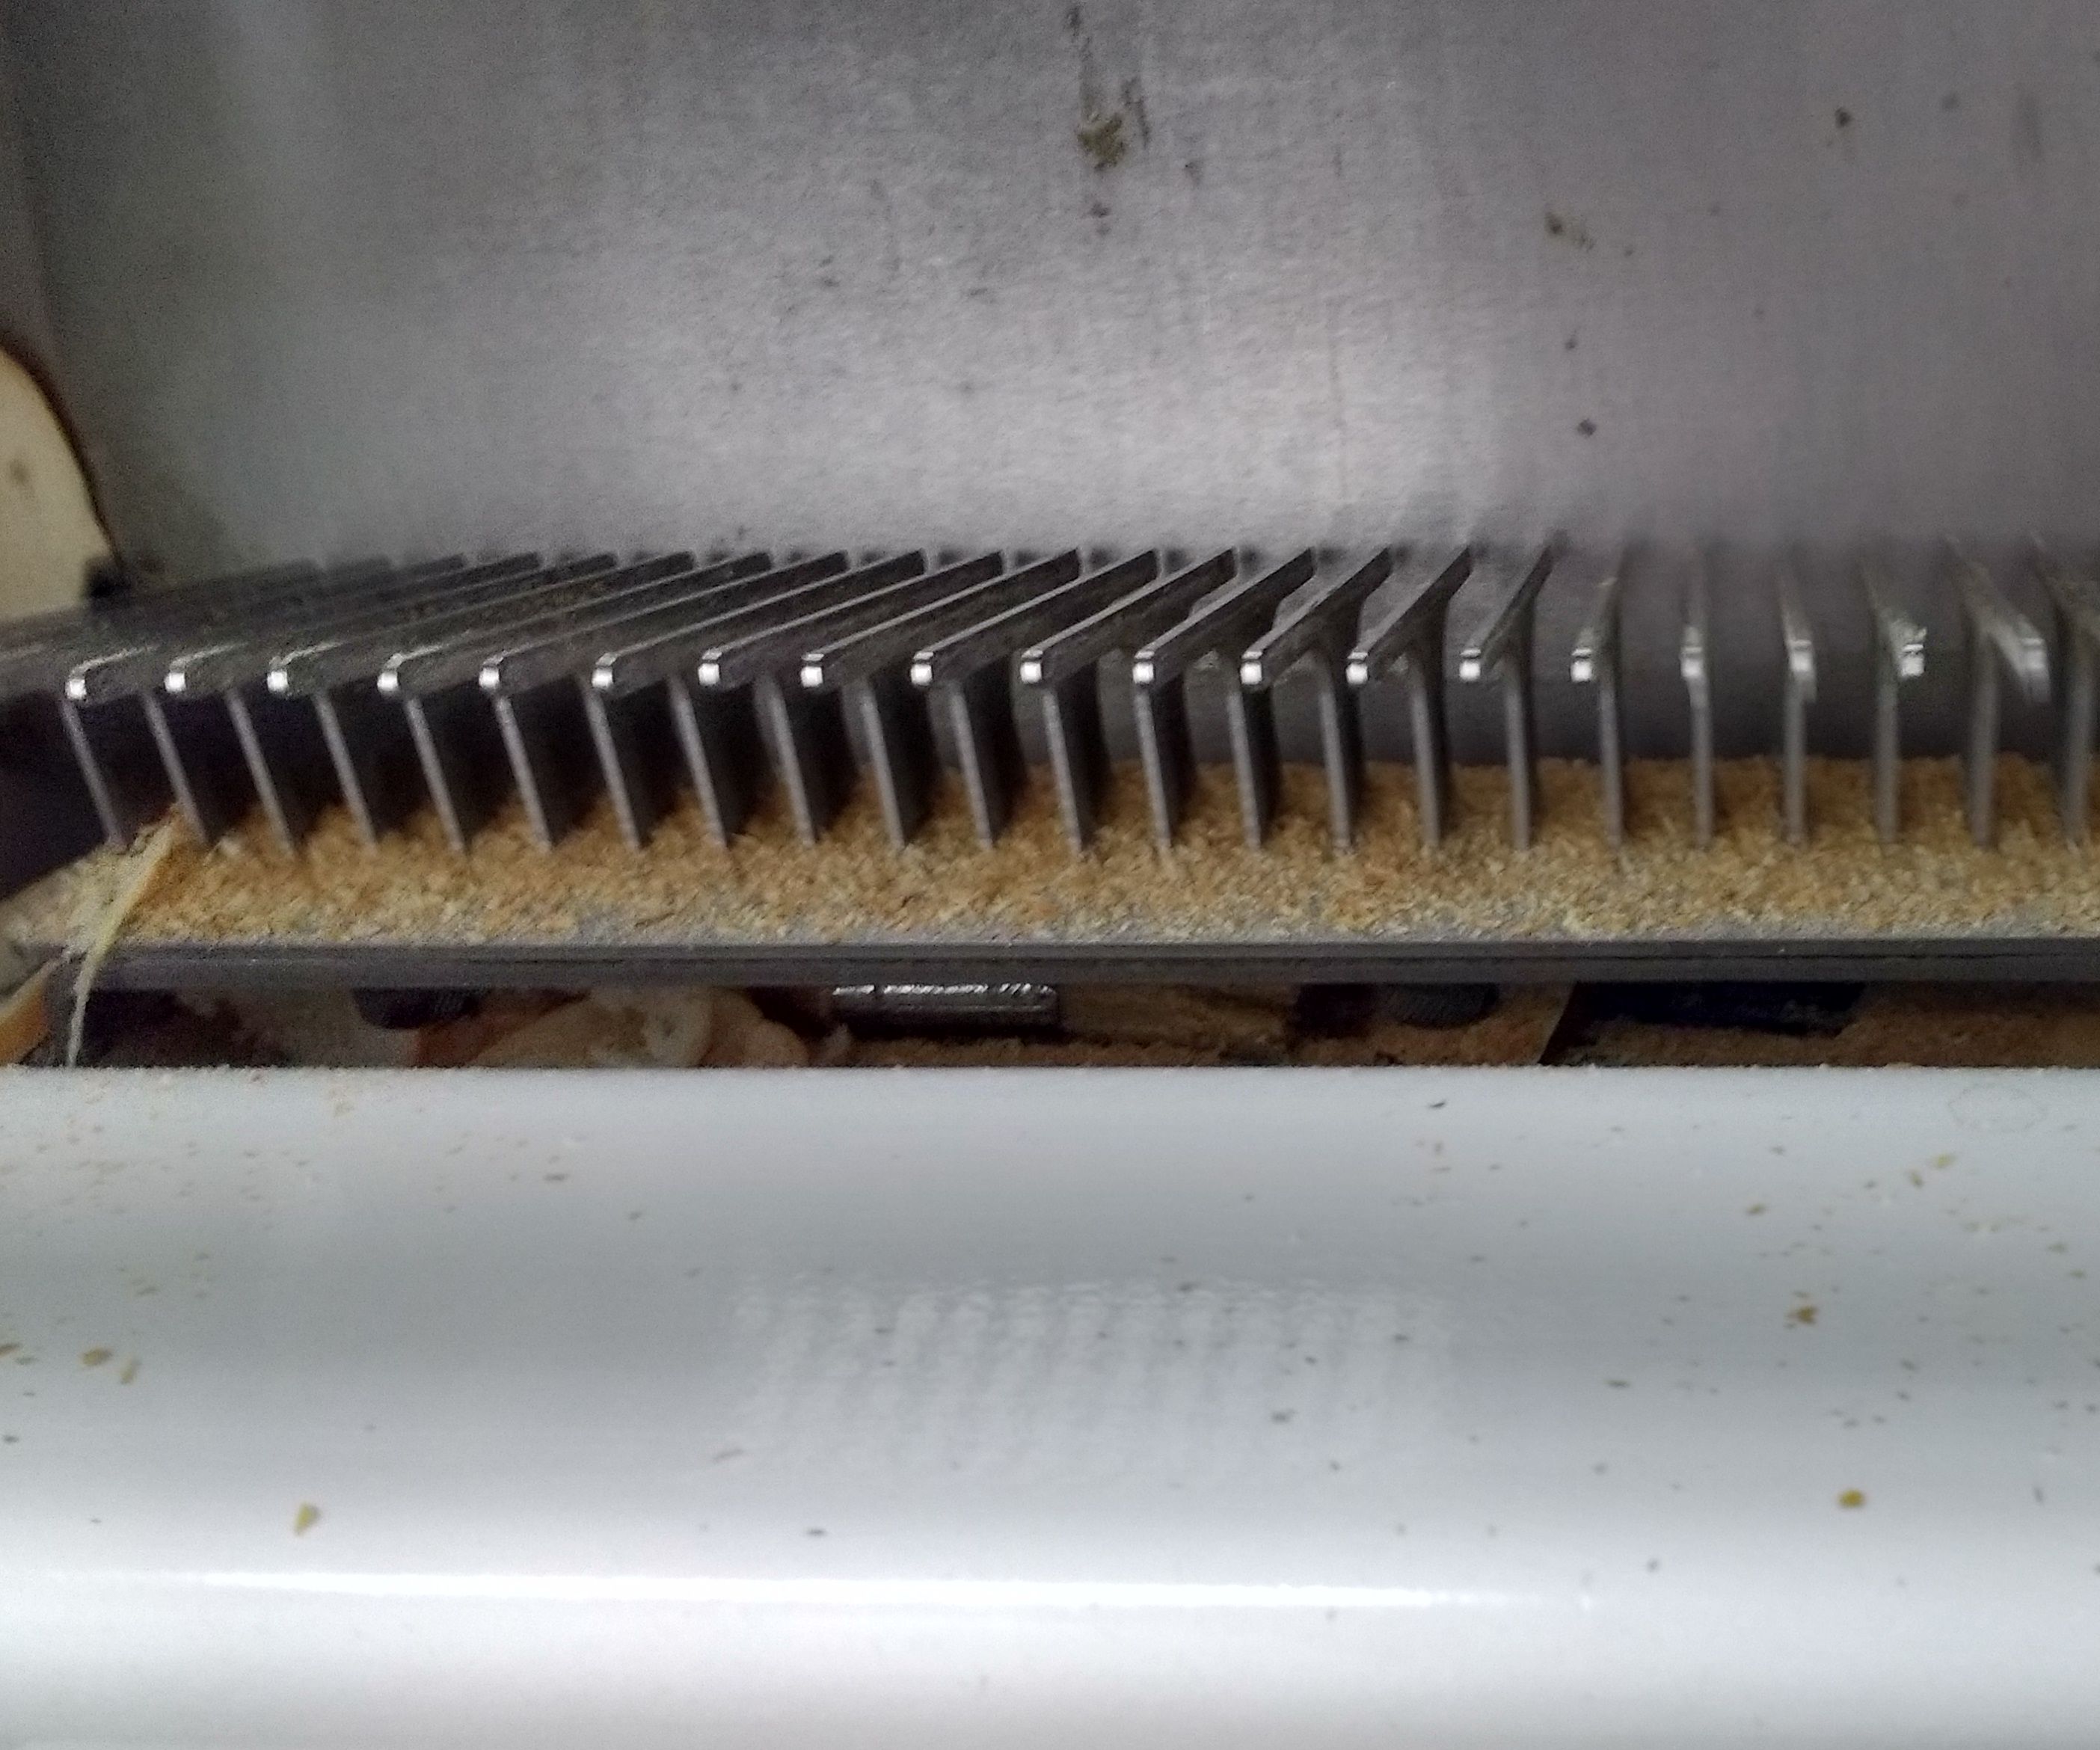 Breadcrumb Comb for Cleaning an Industrial Bread Slicer (Oliver 732-N)